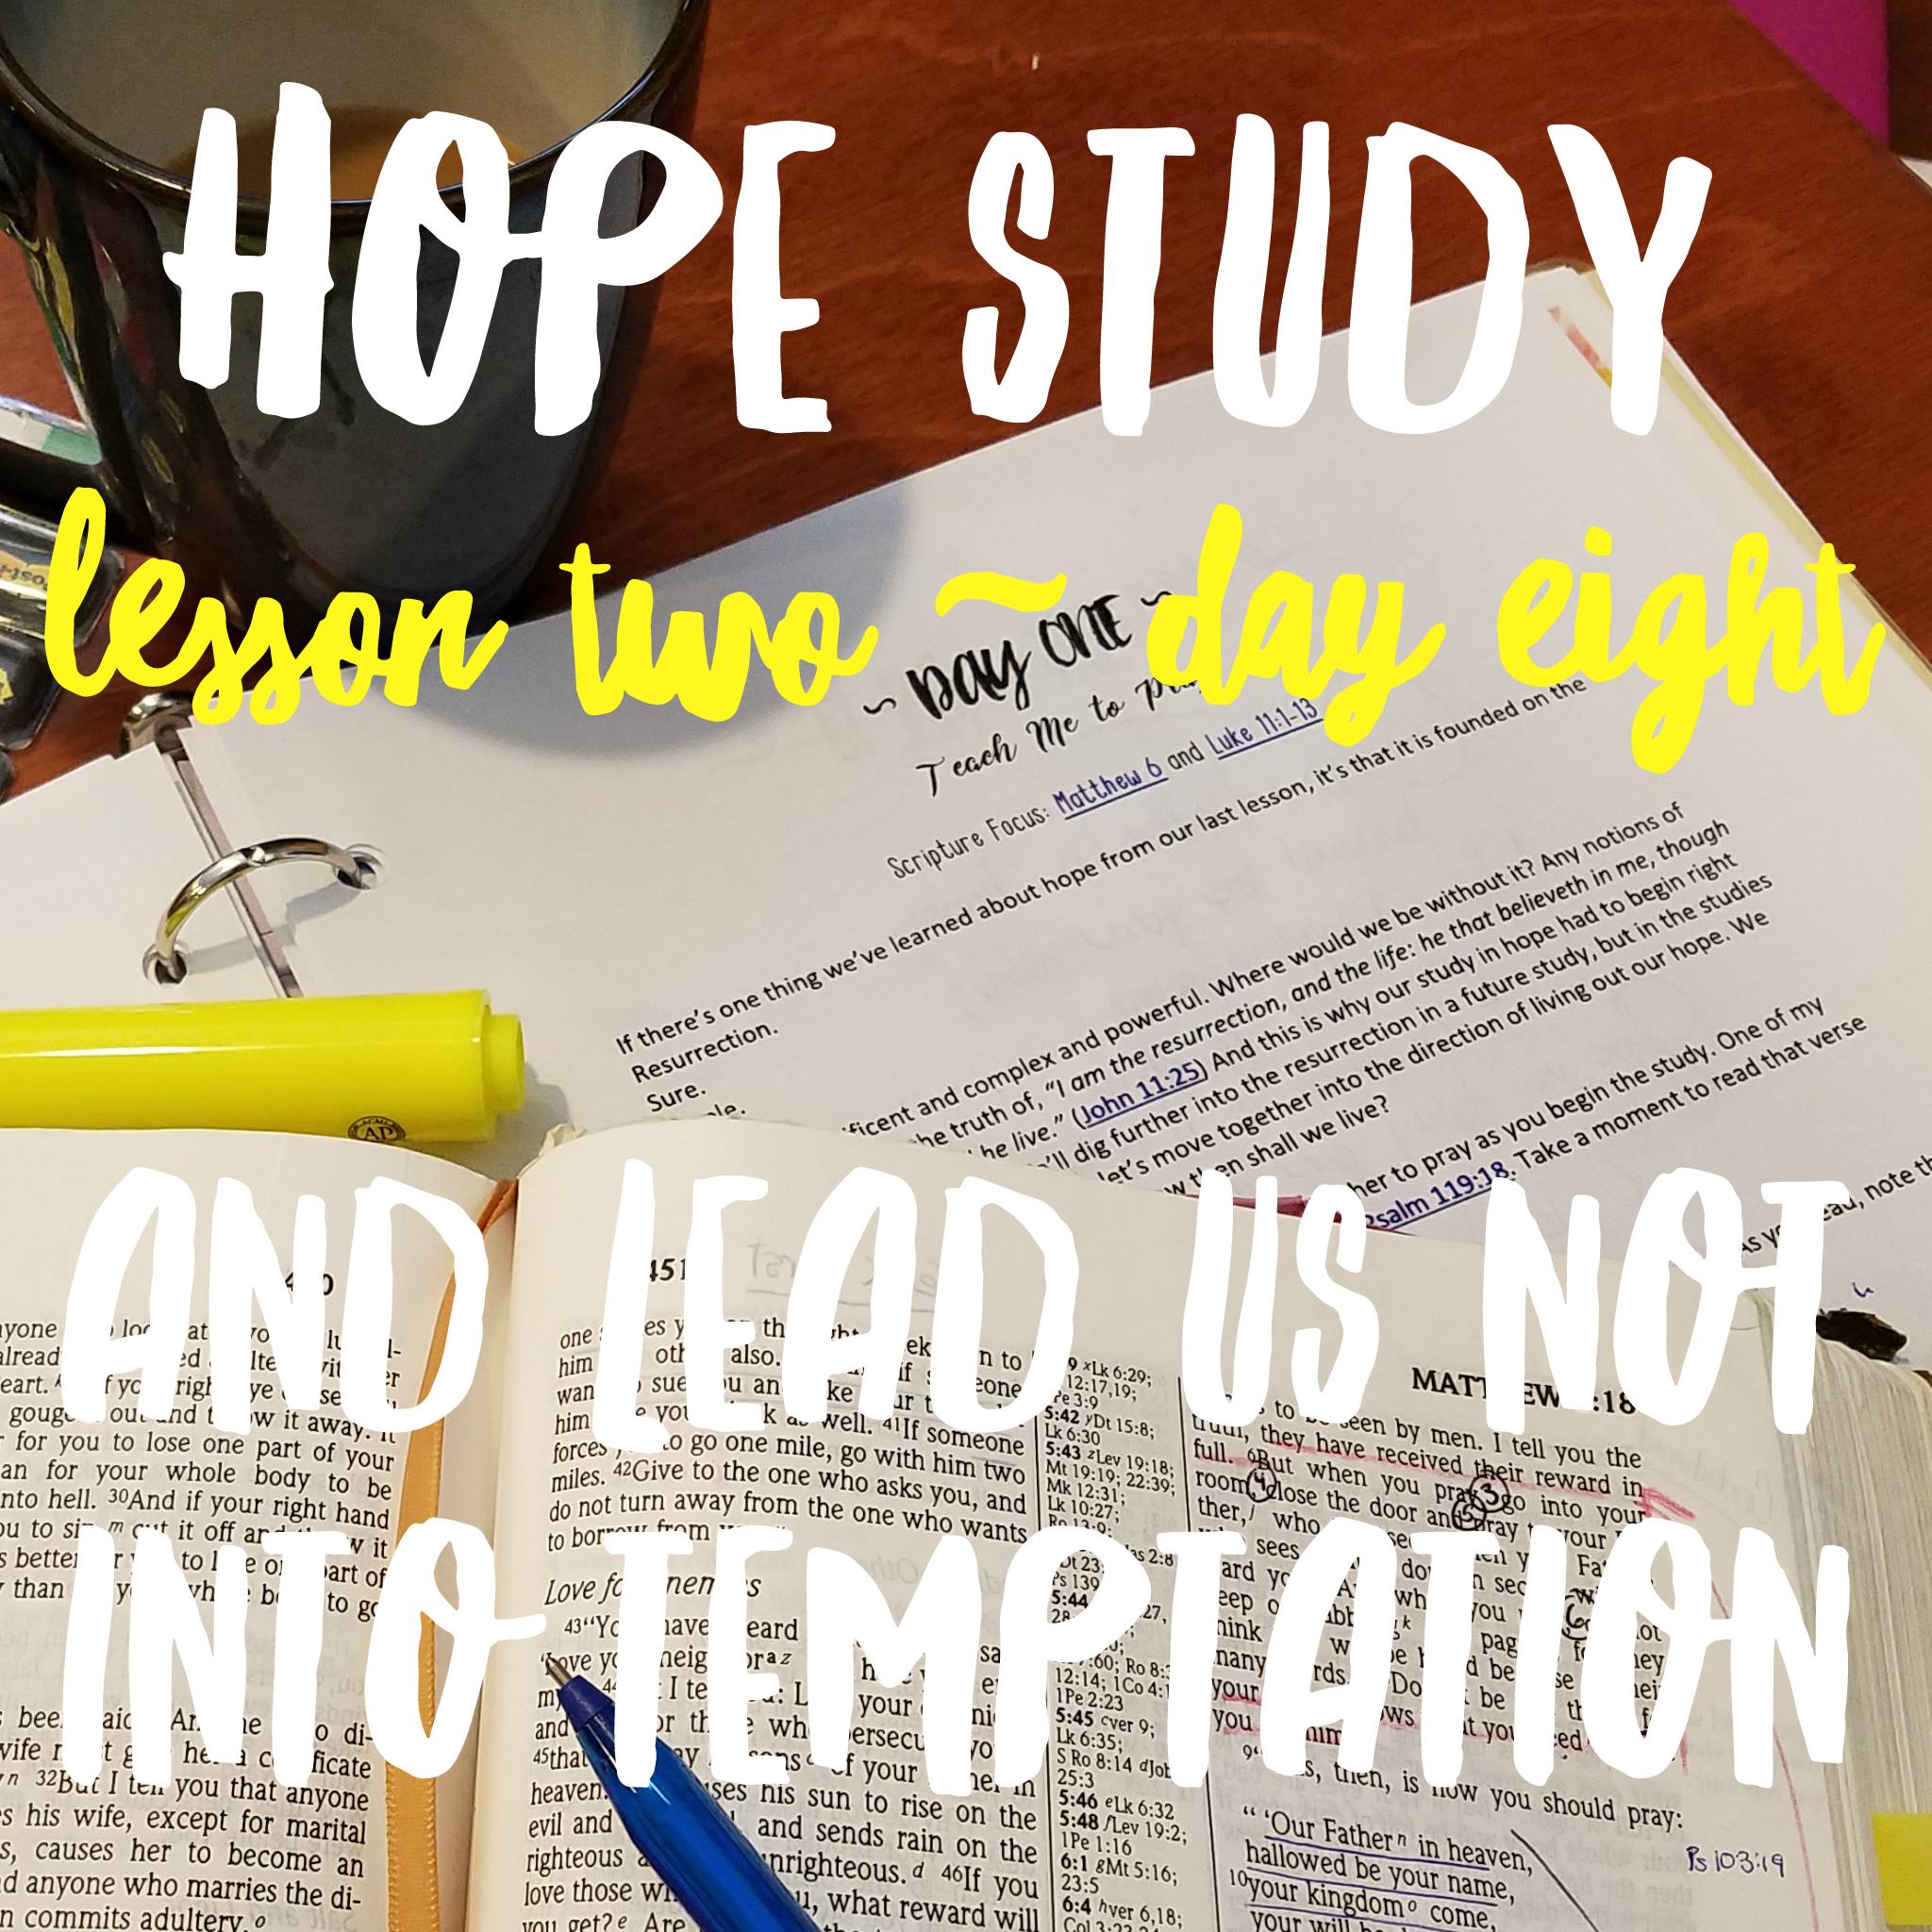 #11 Hope Lesson 2/Day 8 part 1 & 2 “Lead us not into temptation